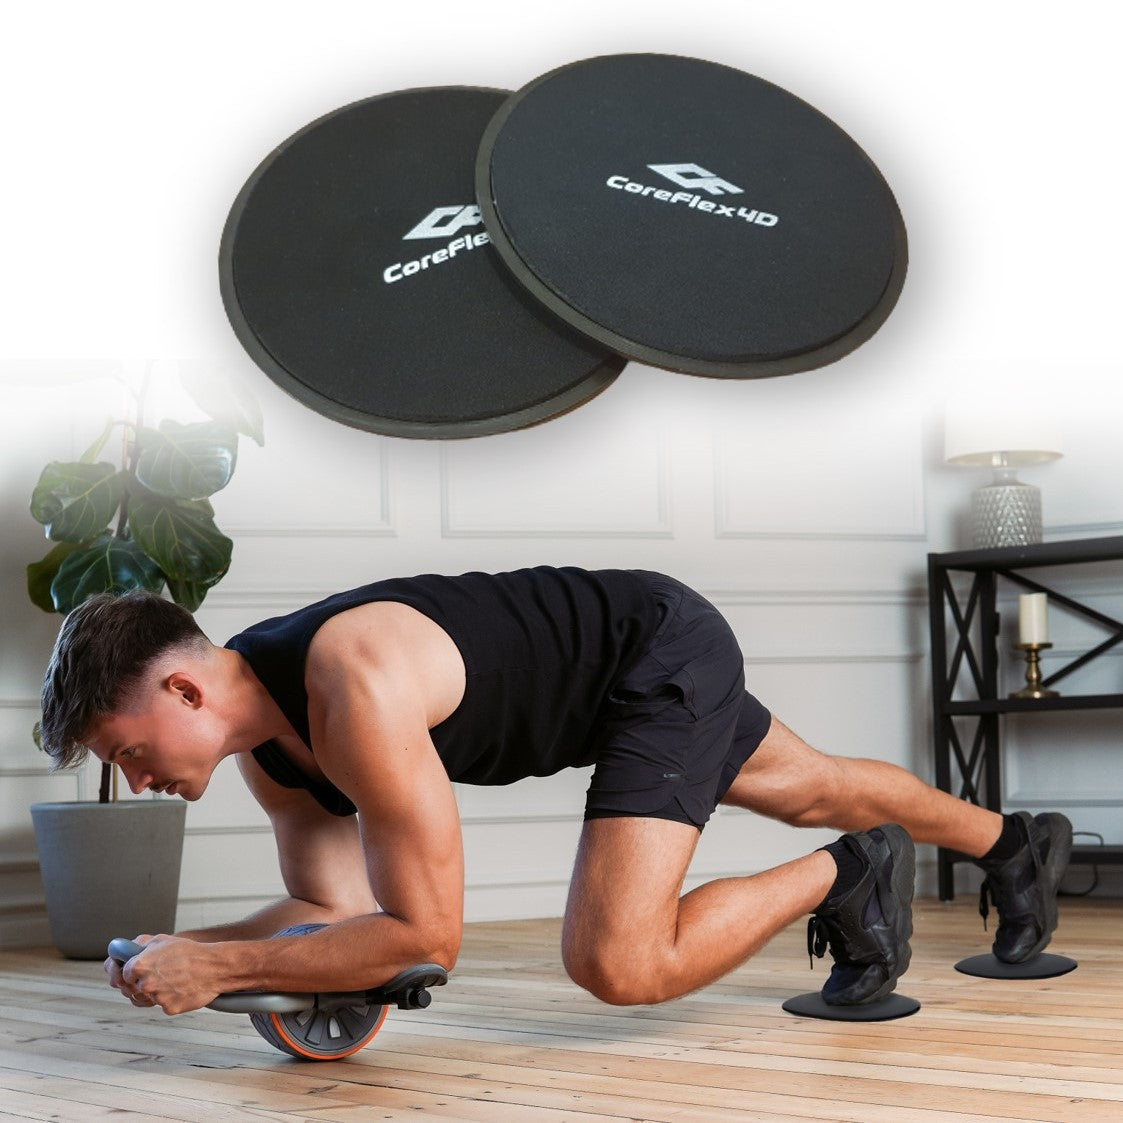 ARMORIOR Exercise Core Sliders Set for Ab Workout, 2 Pack Dual